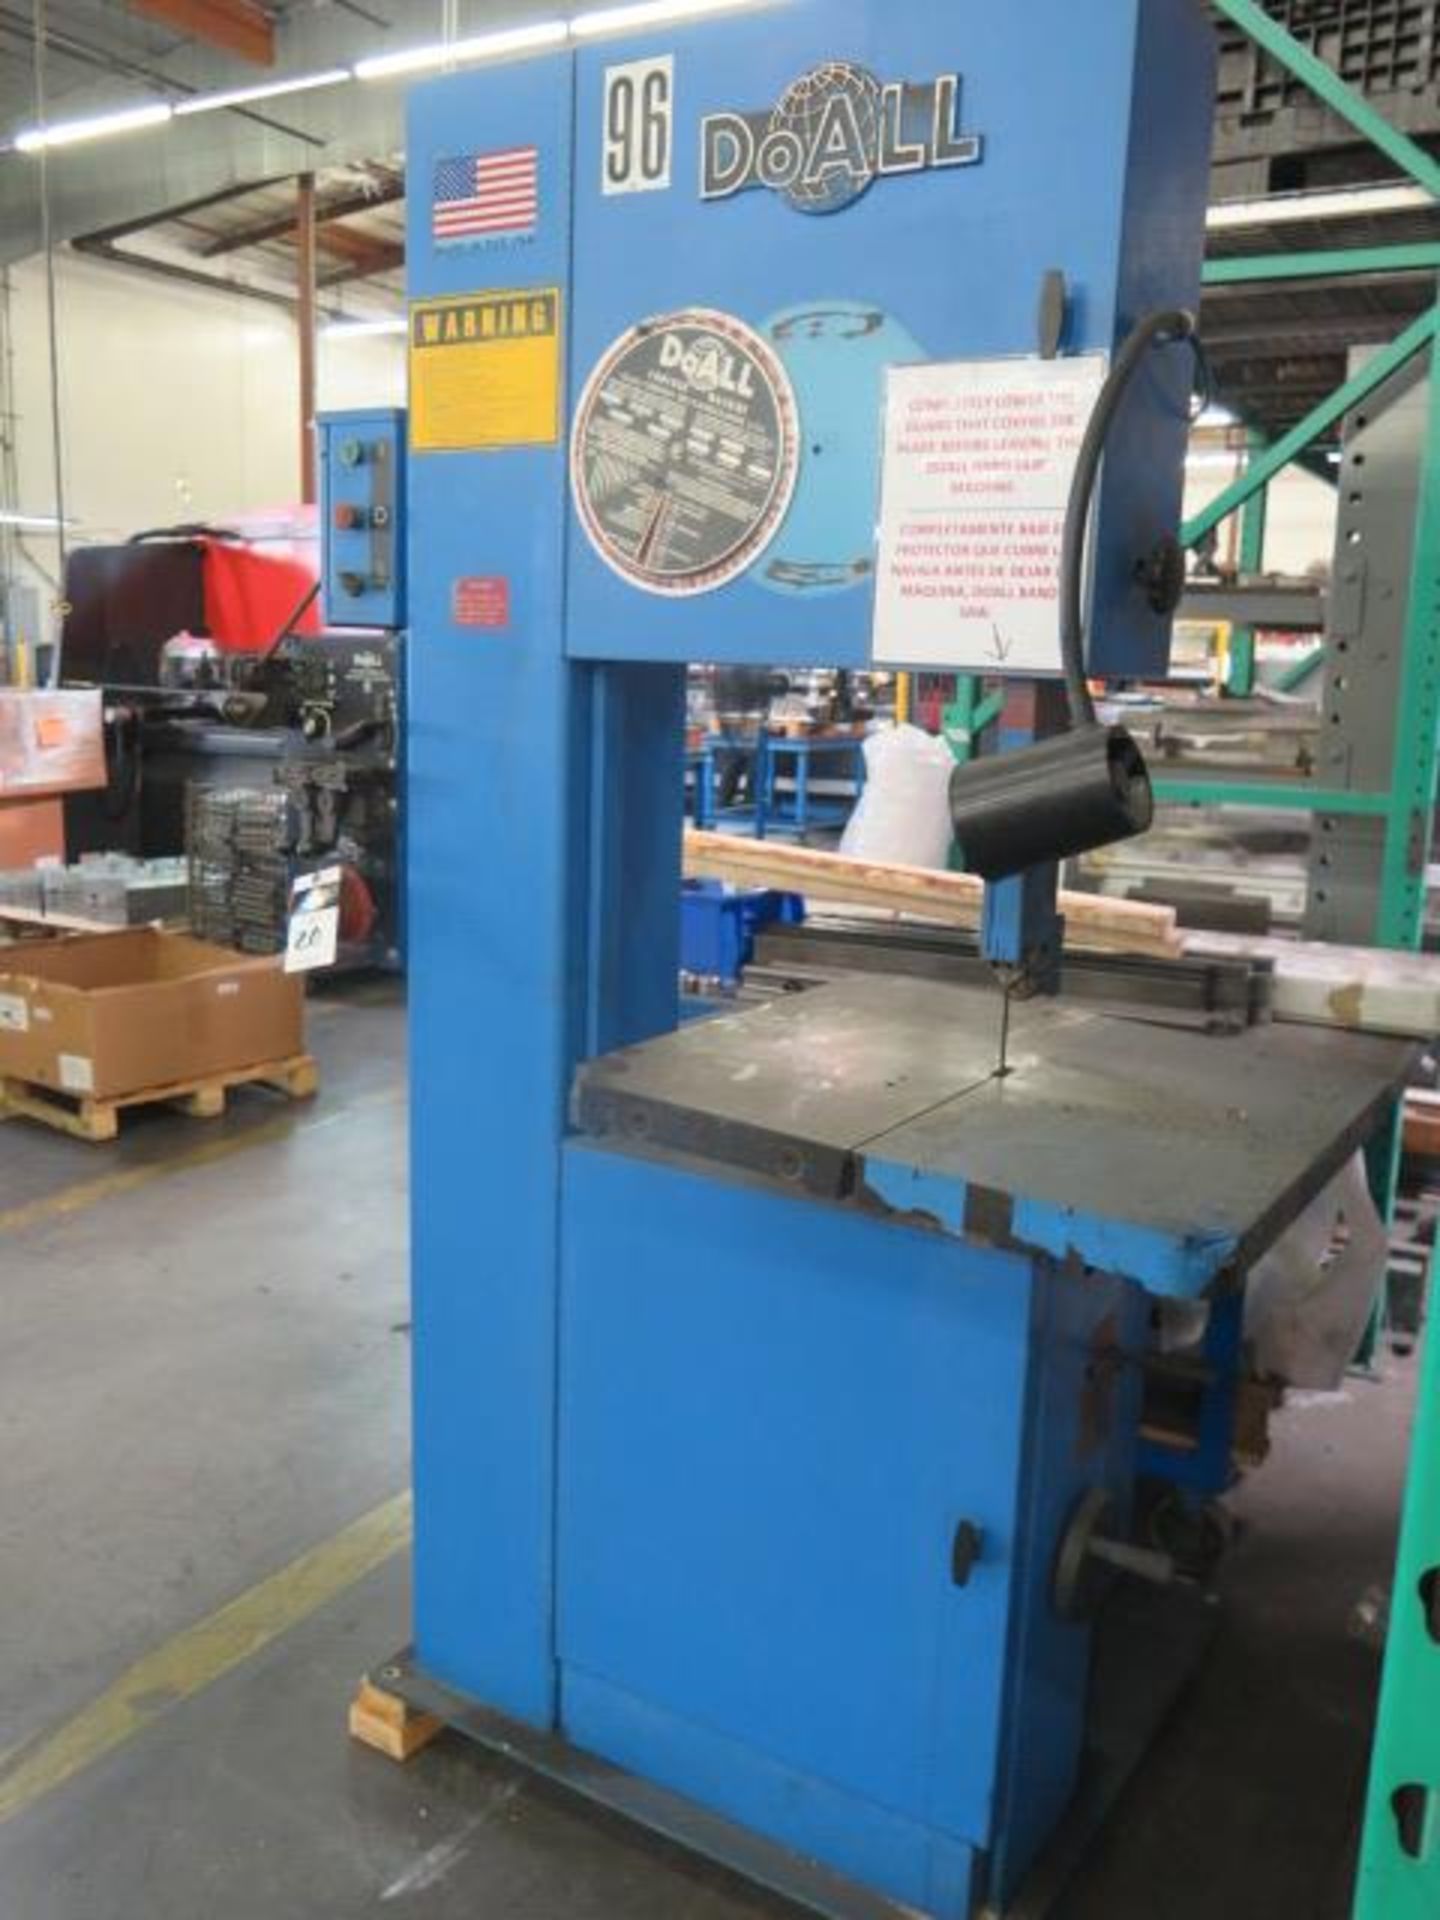 DoAll 2013-V 20" Vertical Band Saw s/n 499-92118 w/ Blade Welder (SOLD AS-IS - NO WARRANTY) - Image 3 of 7